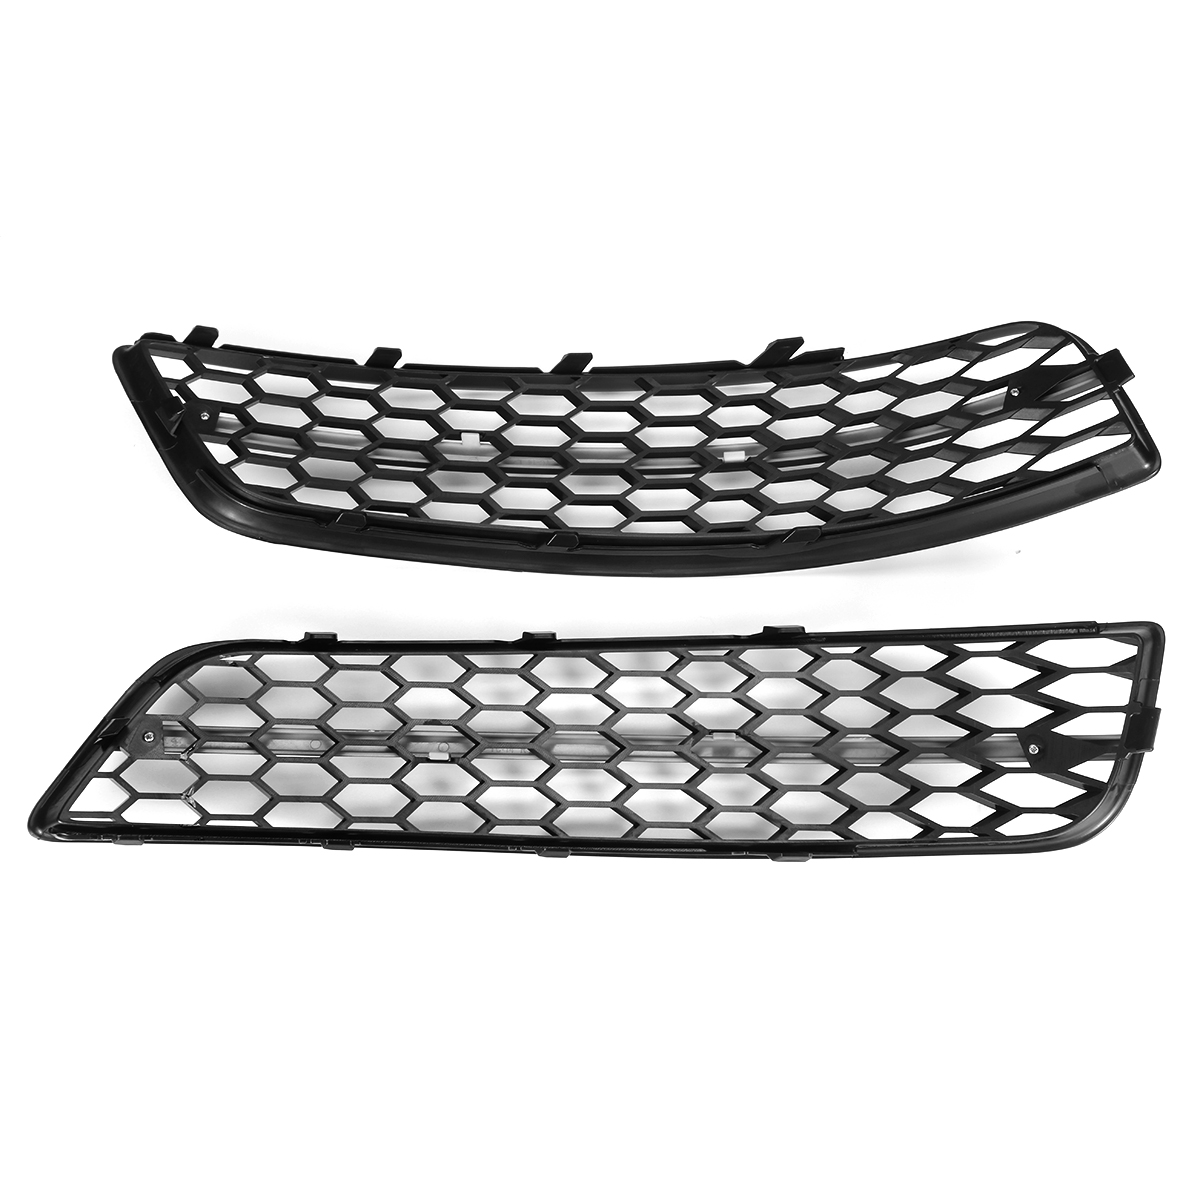 1 Pair Front Grille Fog Light Lamp Cover Glossy Black HONEYCOMB Car Modification for Audi A3 8P 2009-2013 - Auto GoShop